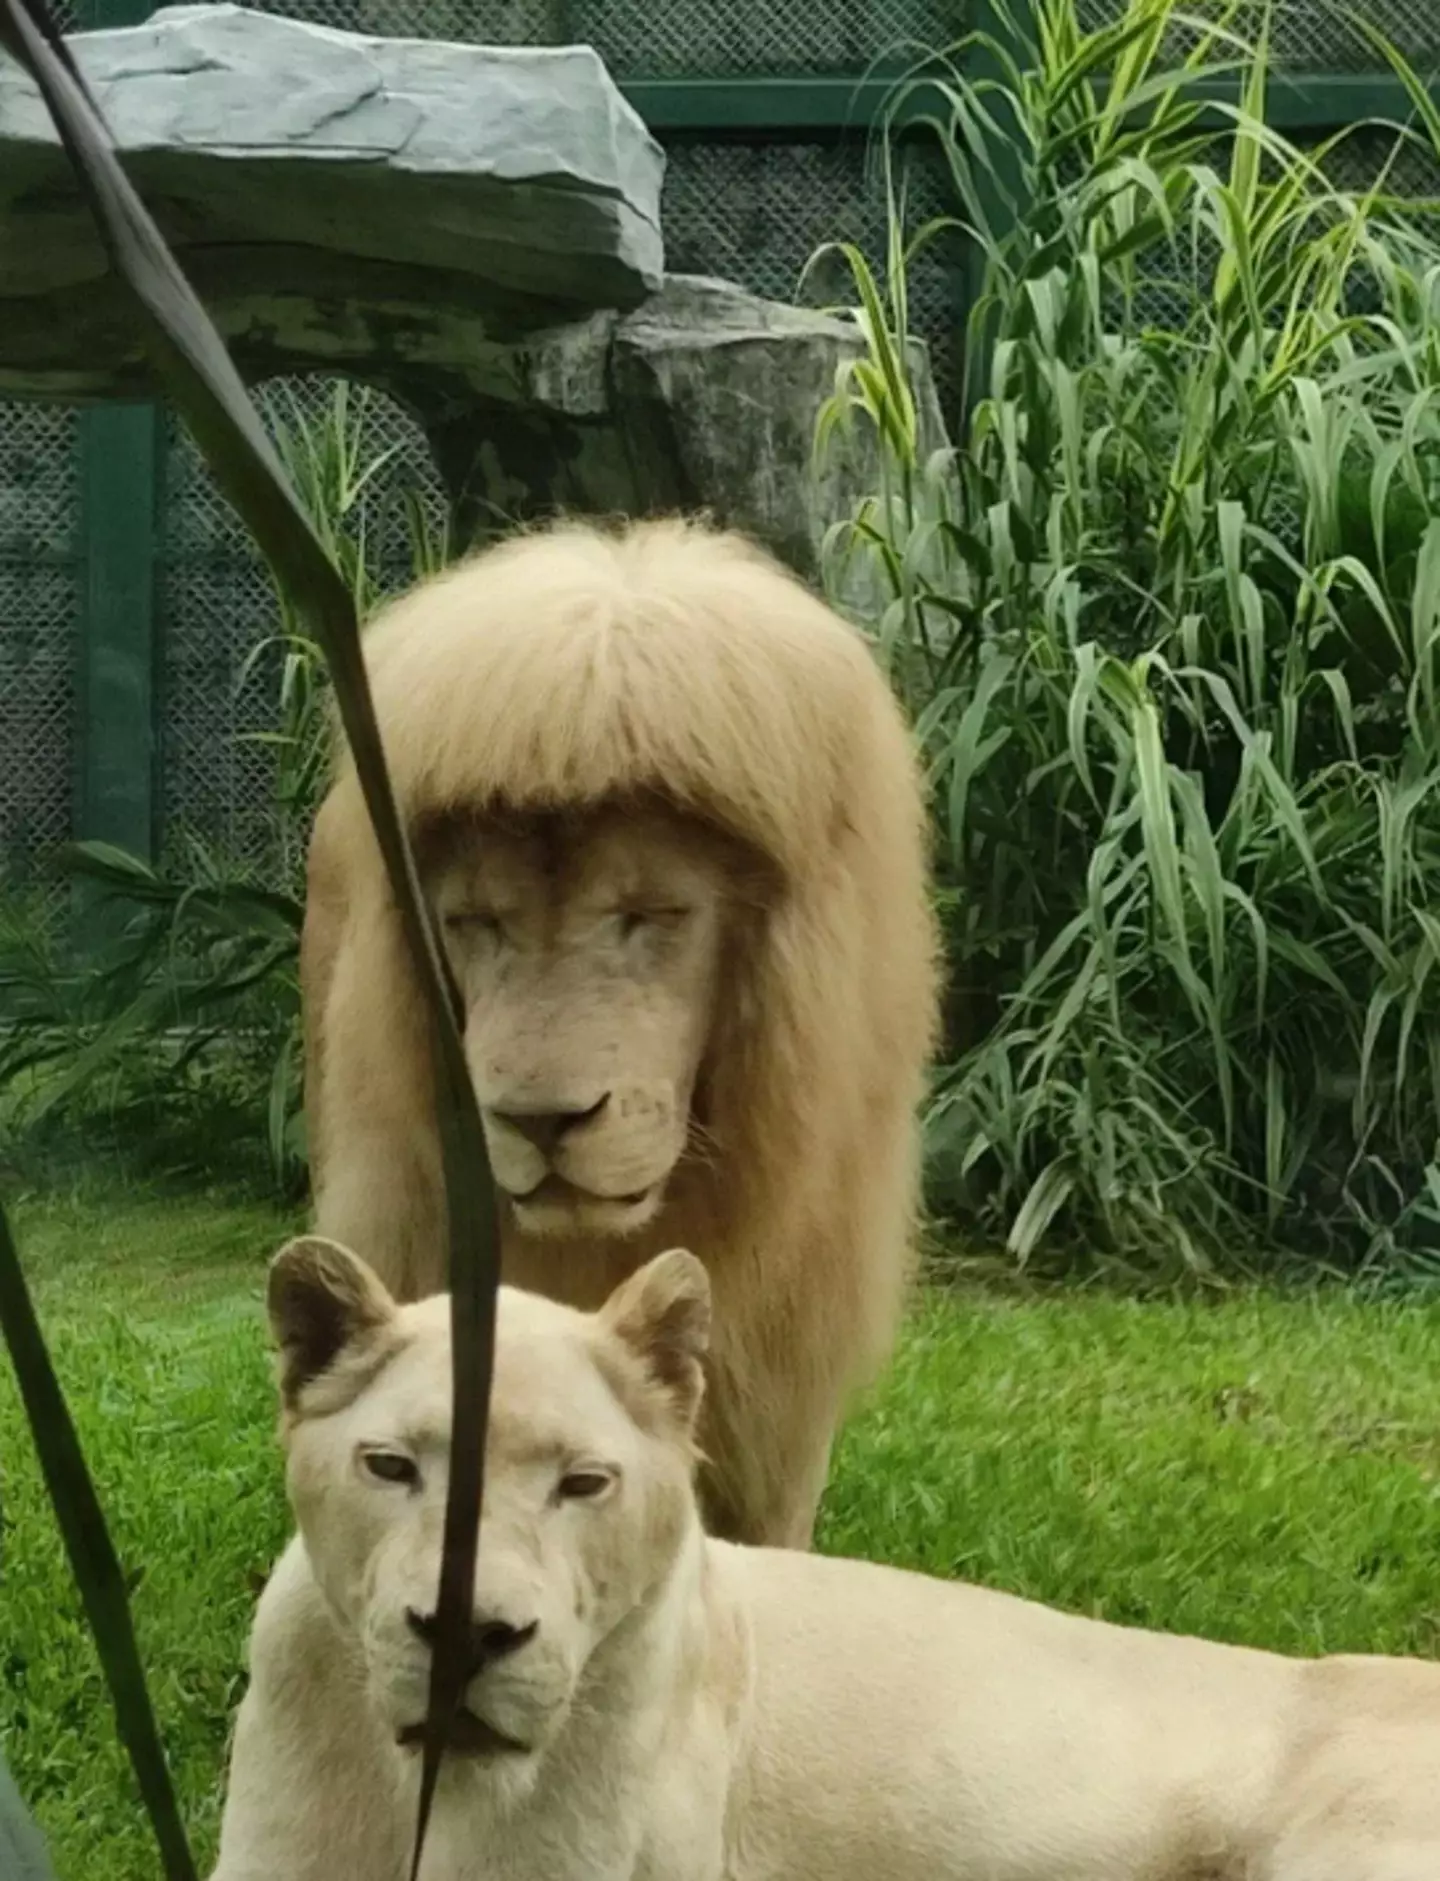 Zookeepers have denied any involvement with the odd haircut of the white lion.